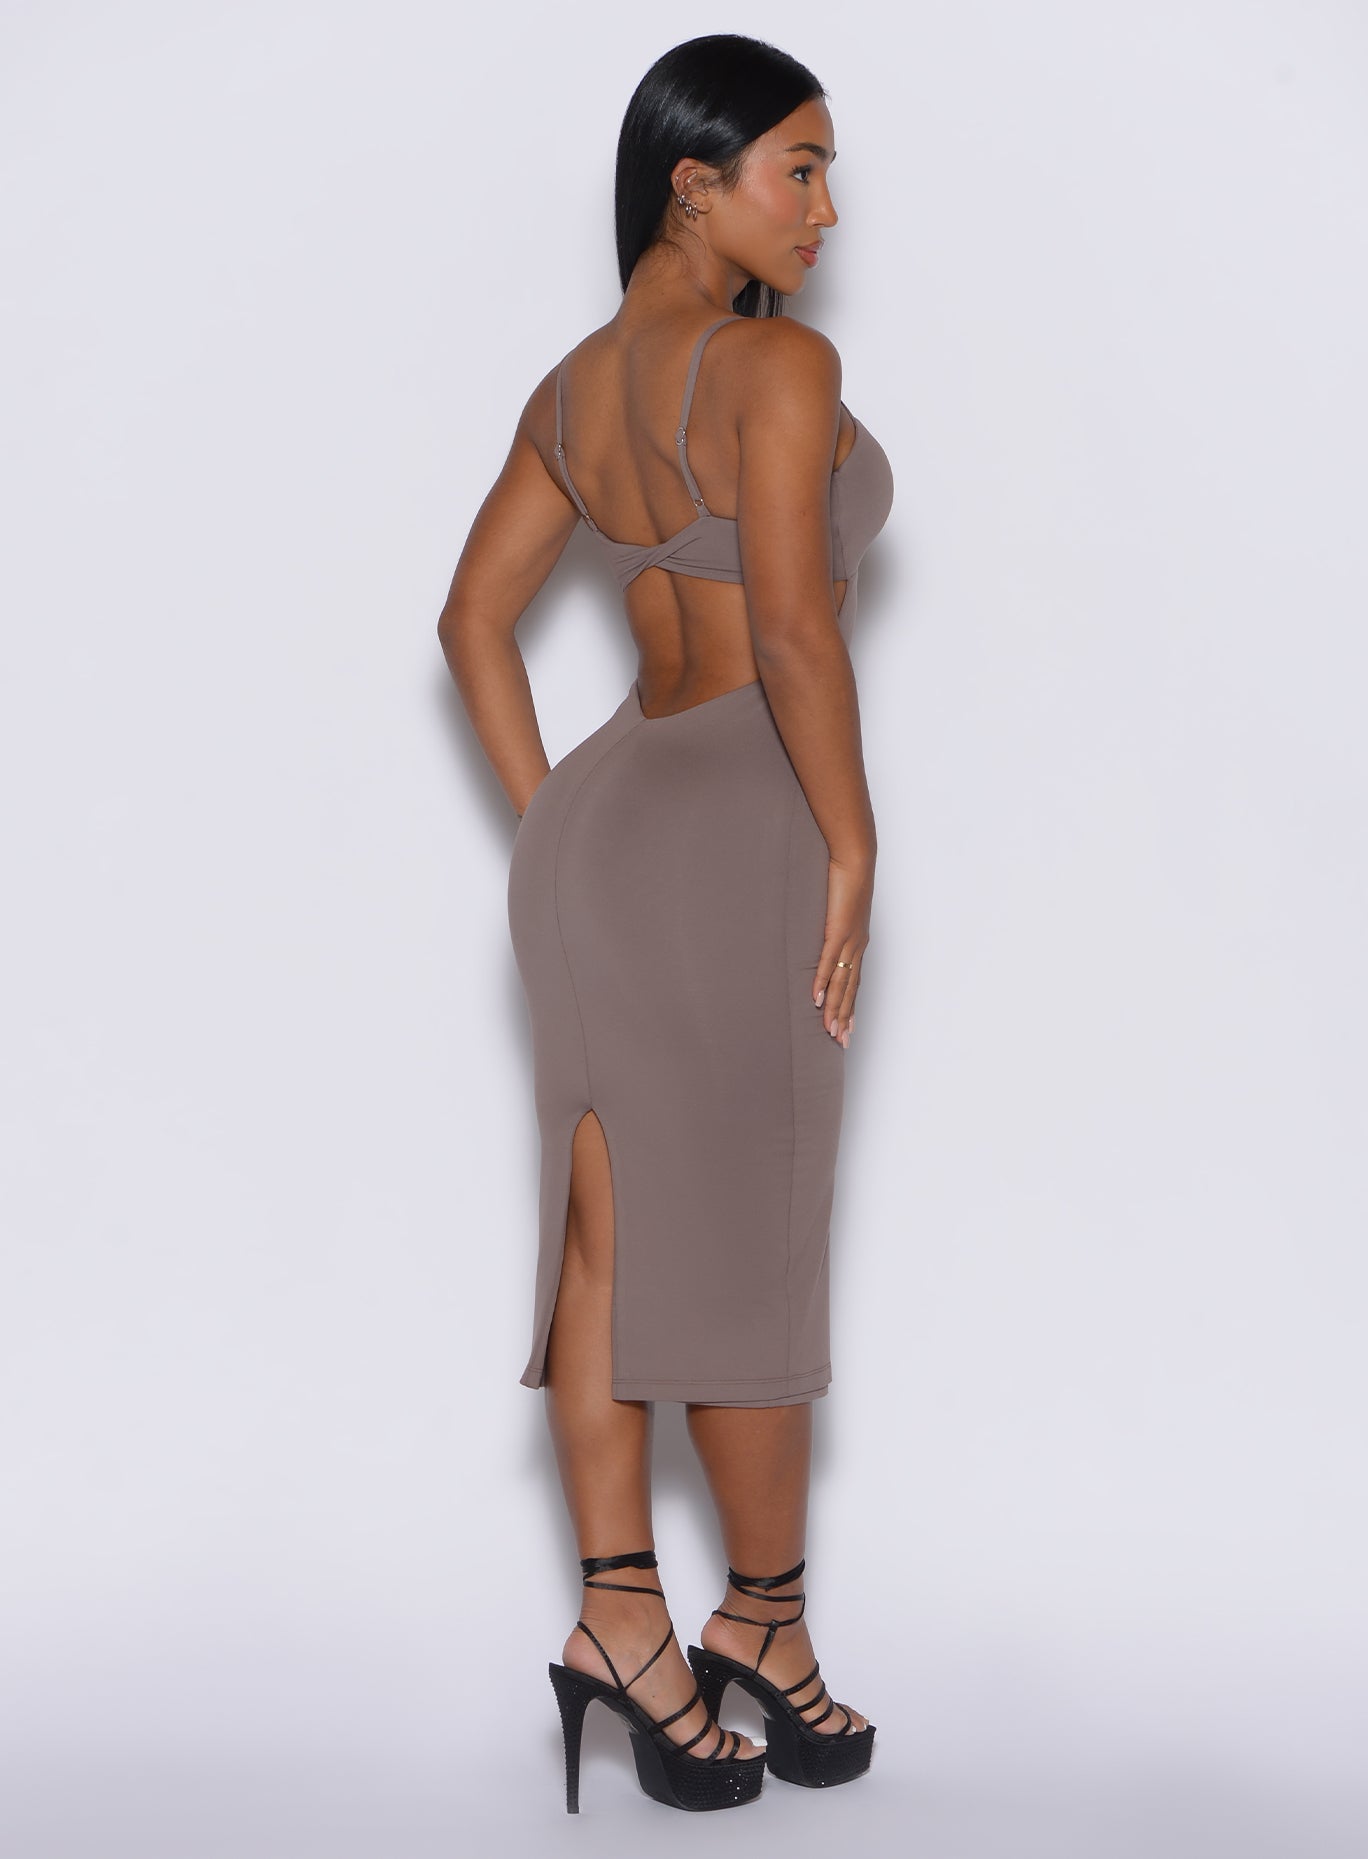 right side profile view of a model facing to her right while wearing our hourglass dress in espresso color 